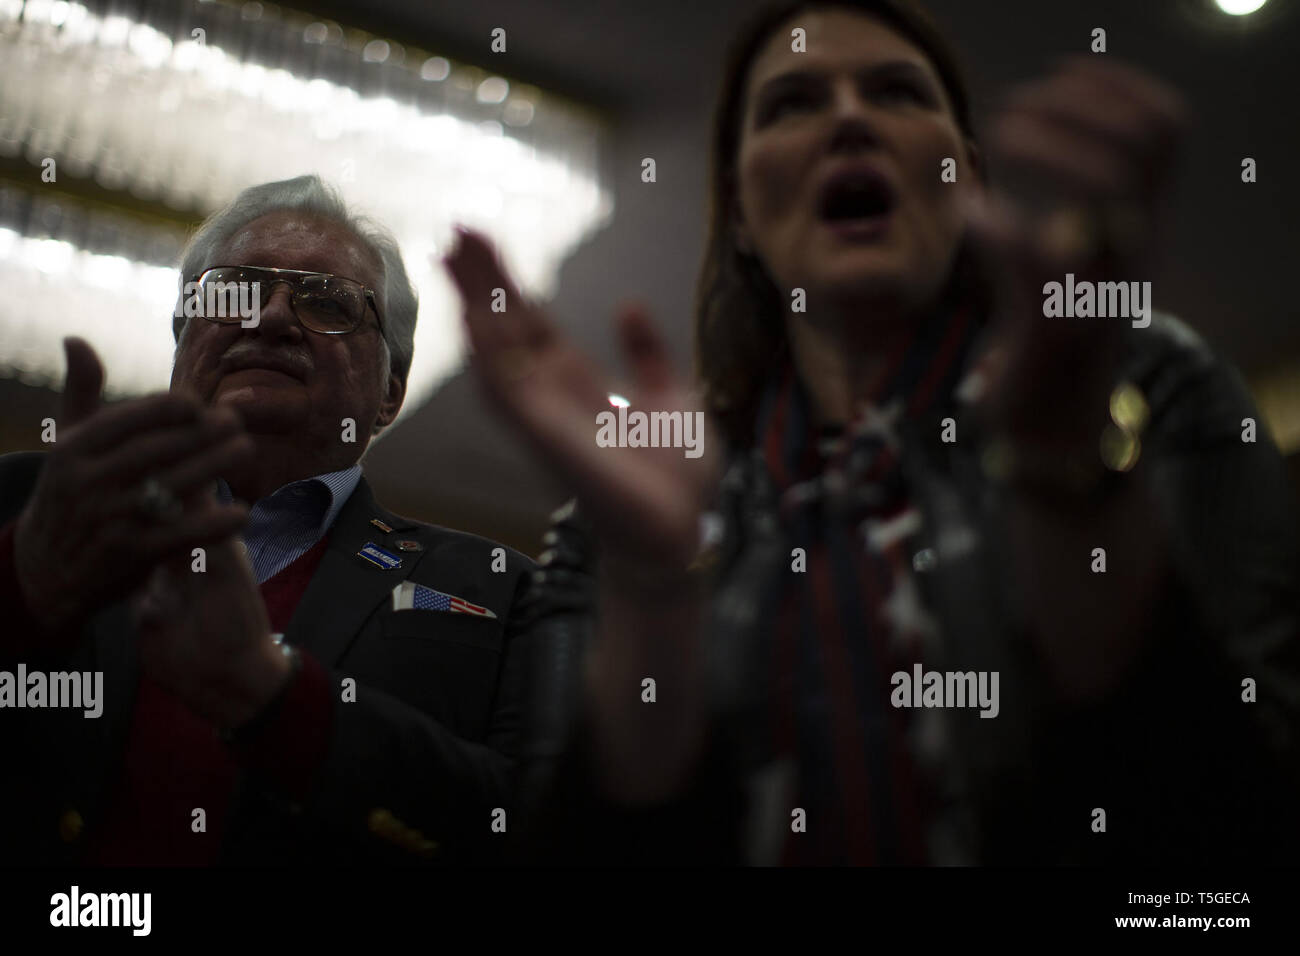 Des Moines, Iowa, USA. 1st Feb, 2016. Supporters of Jeb Bush clap during a caucus event for the candidate in Des Moines, Iowa, February 1, 2016. Bush, son of President George H.W. Bush and brother of President George W. Bush, lost to Sen. Ted Cruz from Texas. Credit: Bill Putnam/ZUMA Wire/Alamy Live News Stock Photo